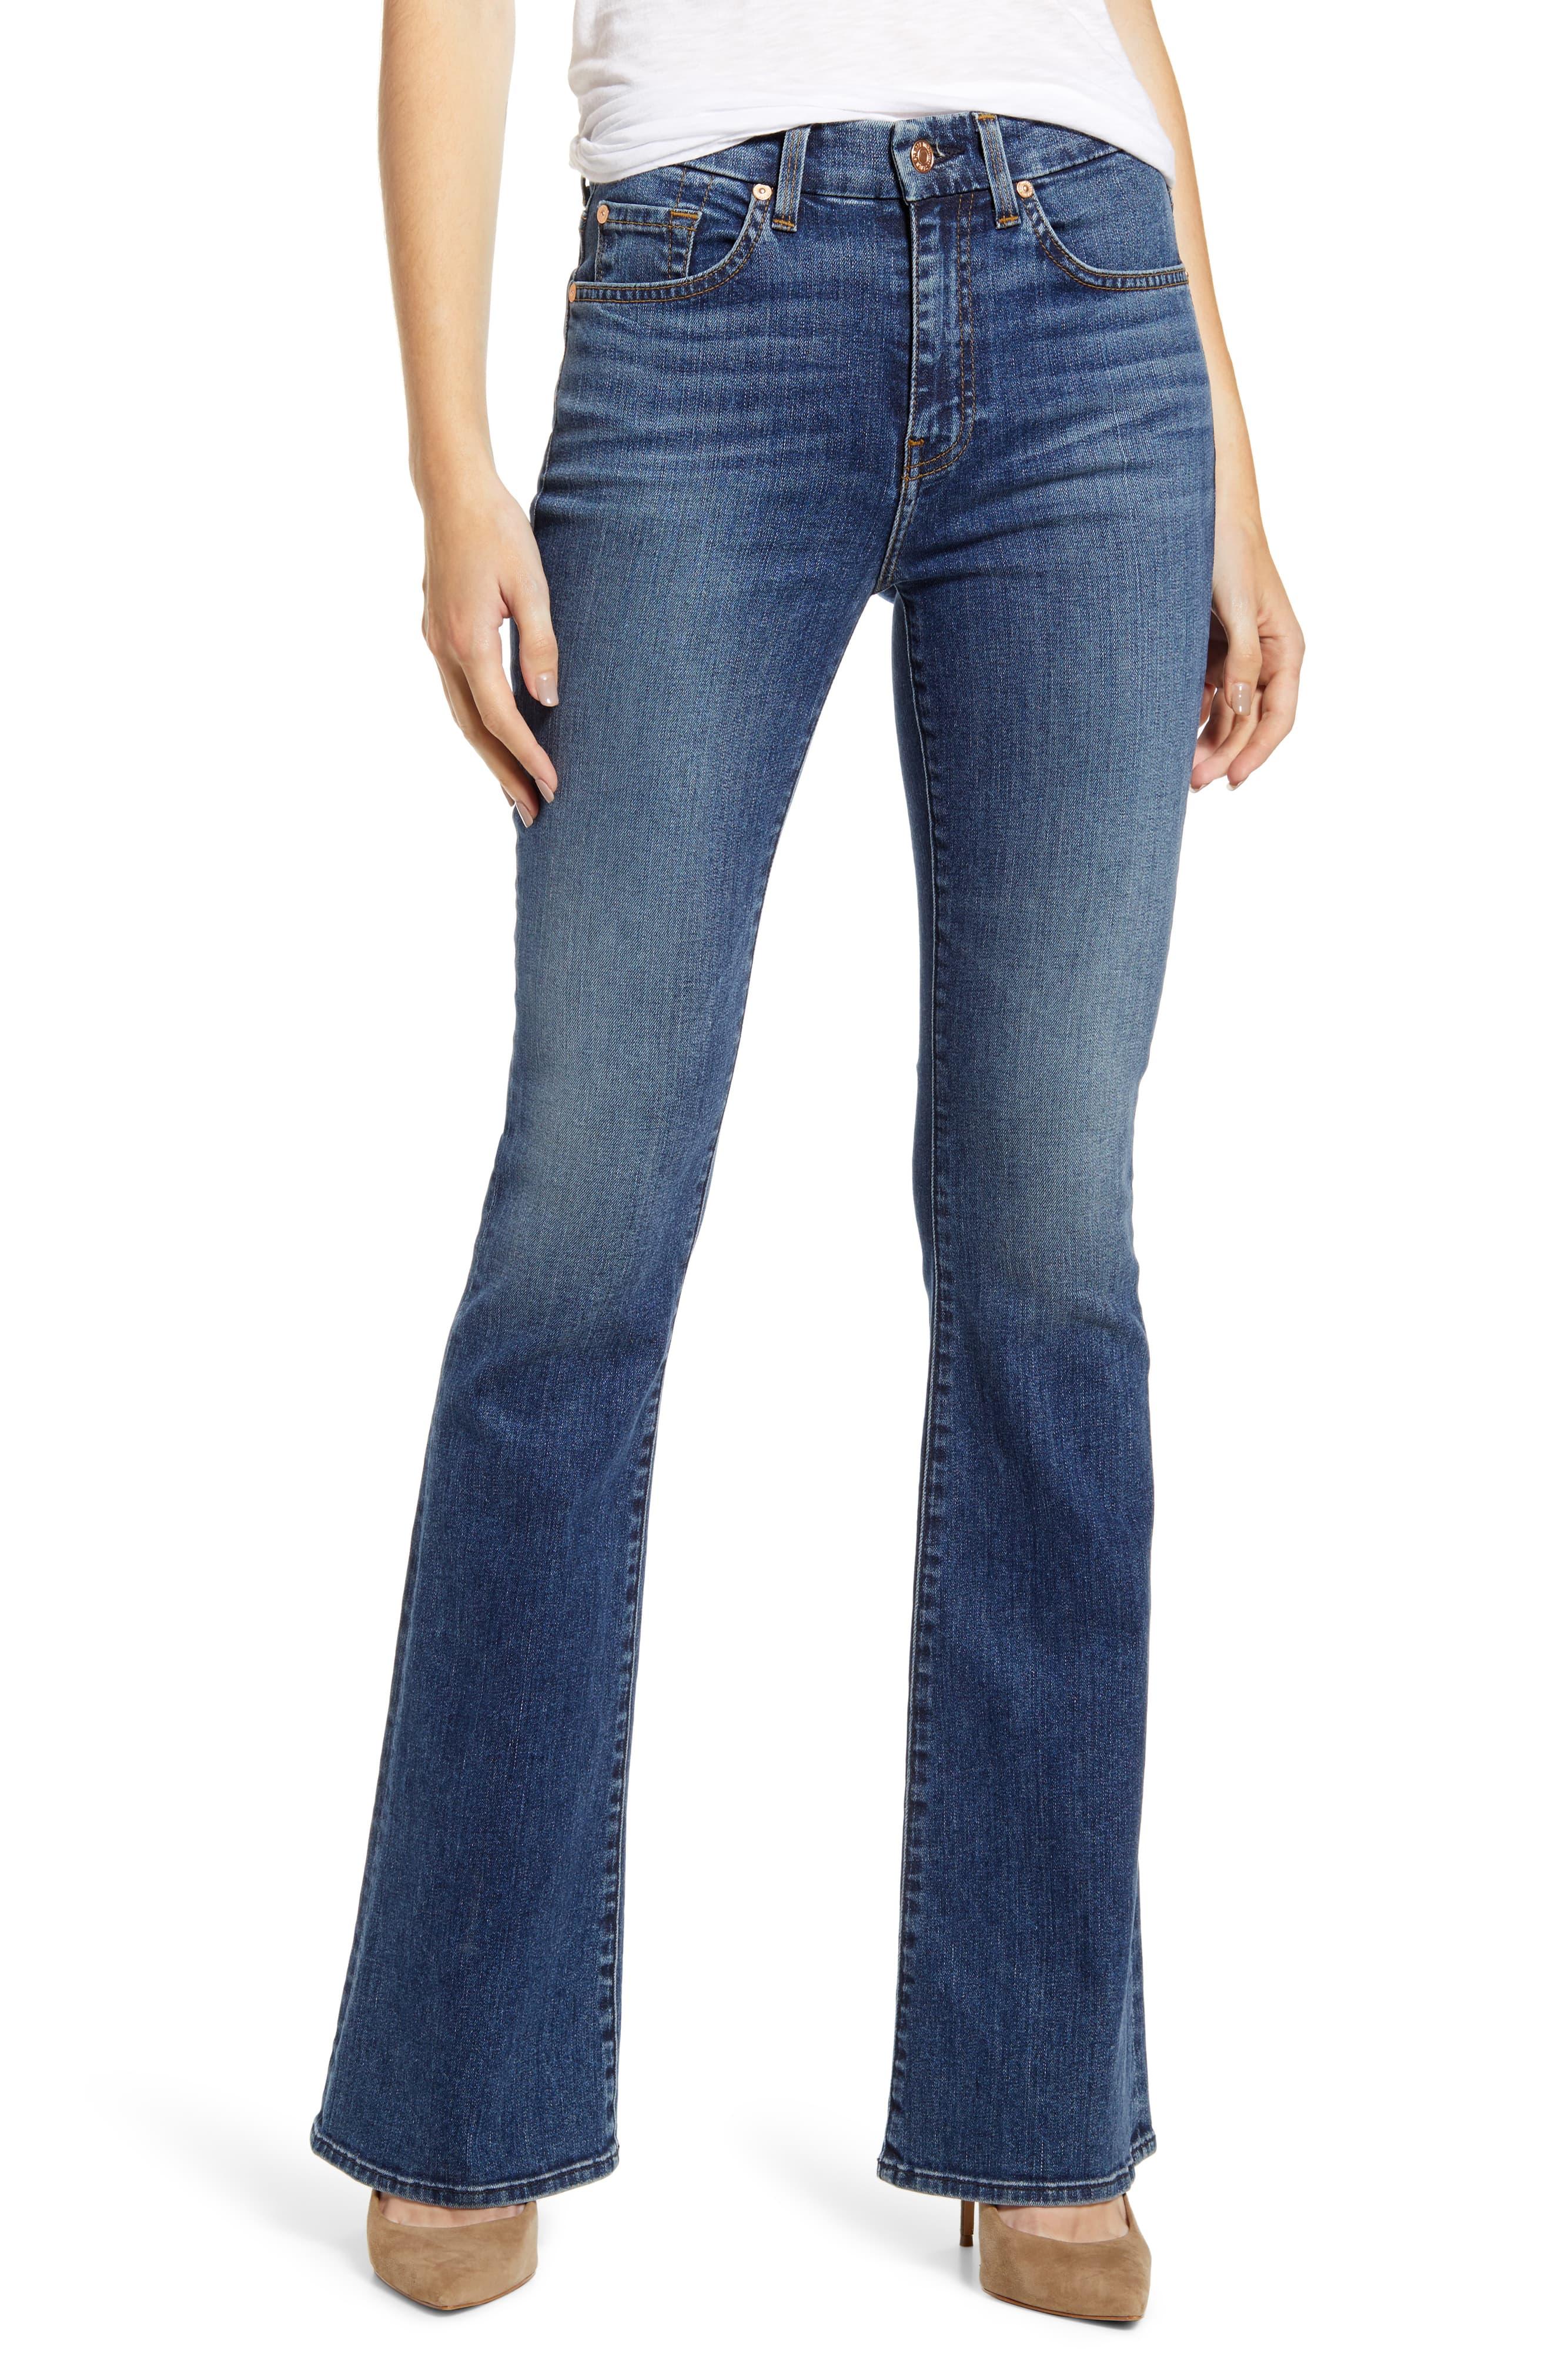 7 For All Mankind 7 For All Mankind Ali High Waist Flare Leg Jeans in ...